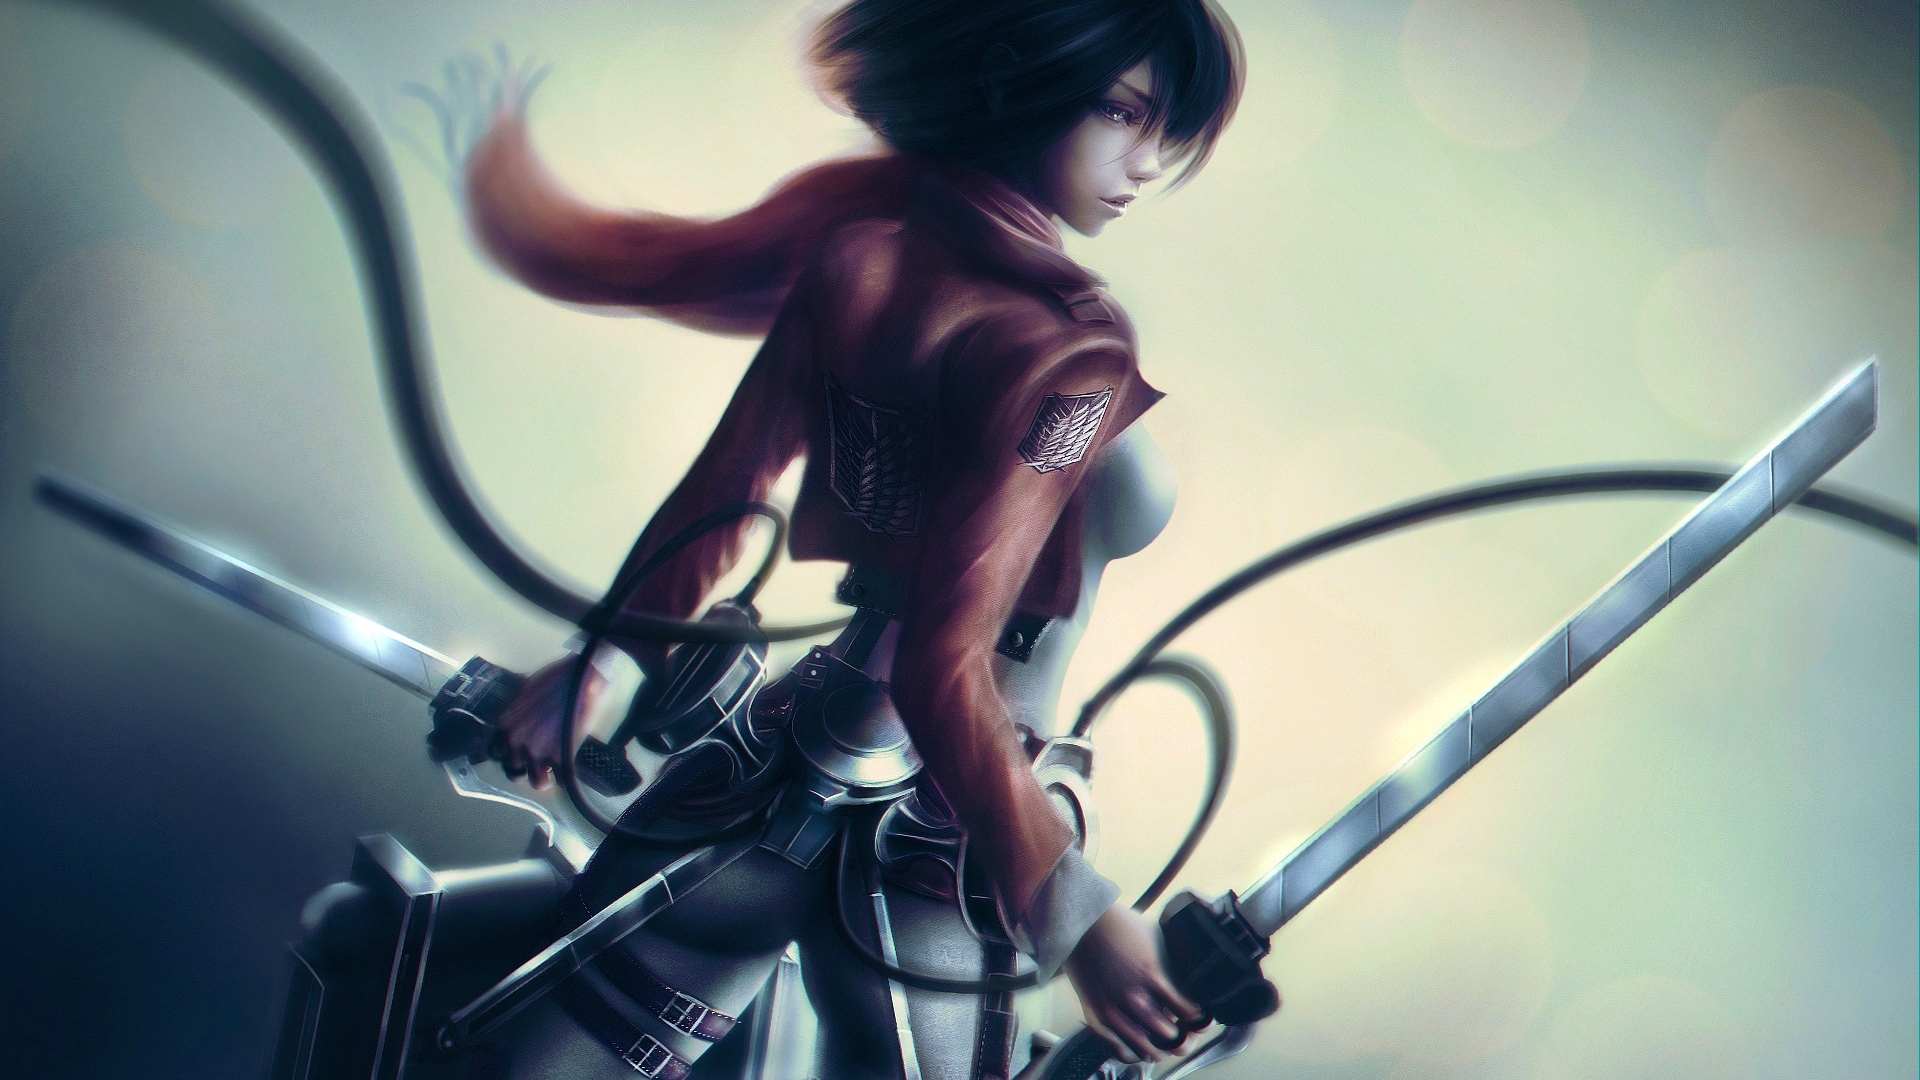 Mikasa Ackerman With Sword Wallpaper Hd Anime 4k Wallpapers Images Photos And Background Wallpapers Den